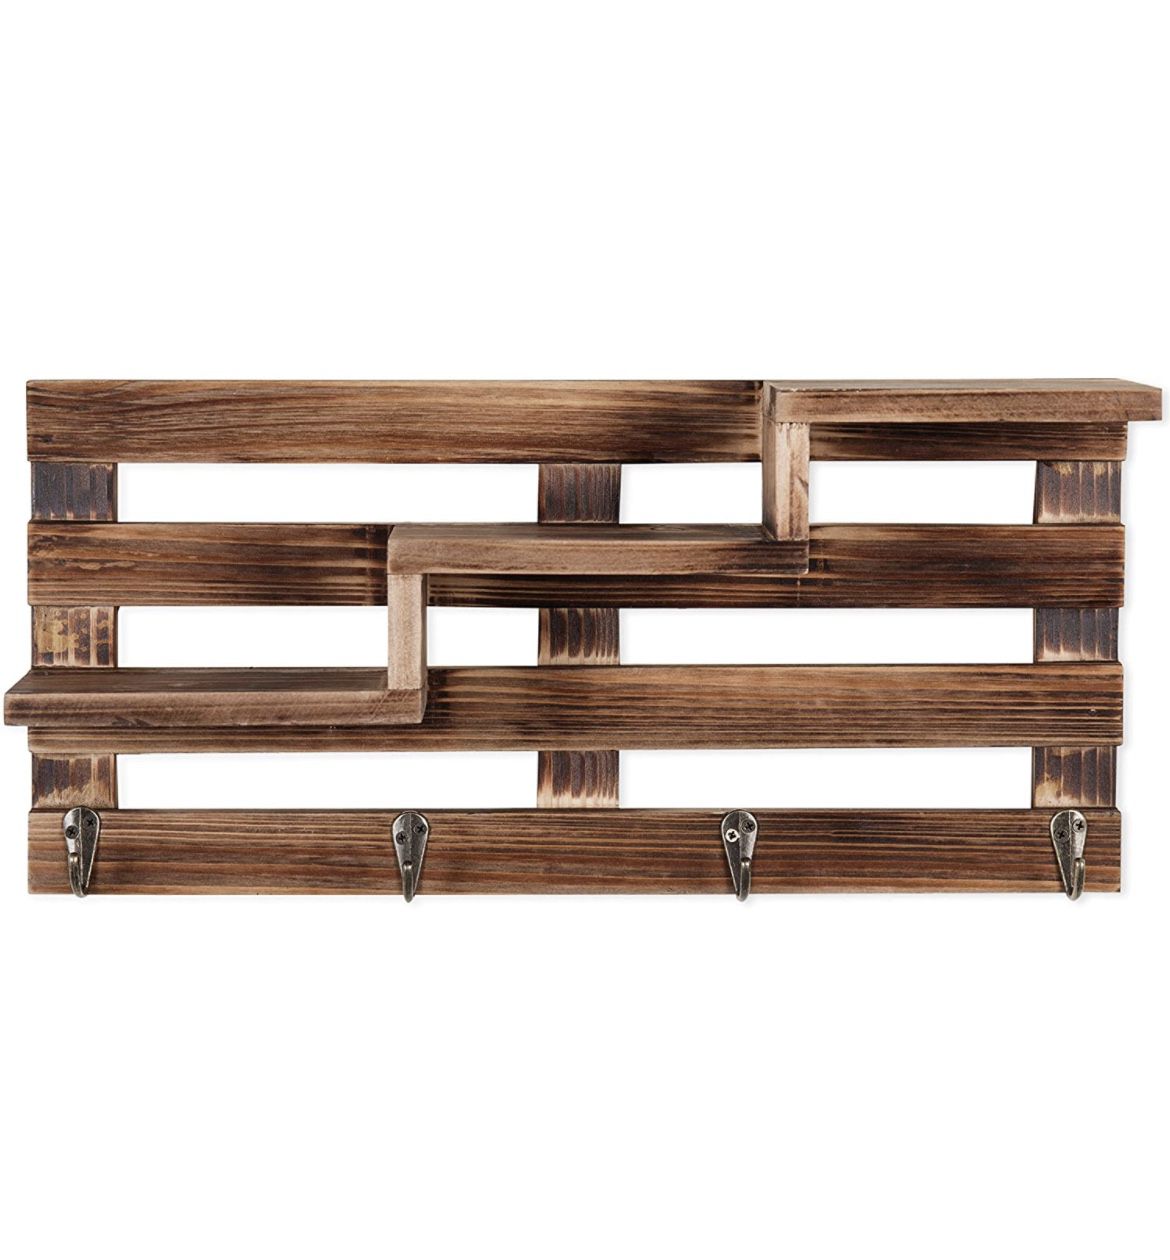 Key Rack for Wall, Rustic Burnt Wood Entryway Key Holder with Tiered Floating Shelves